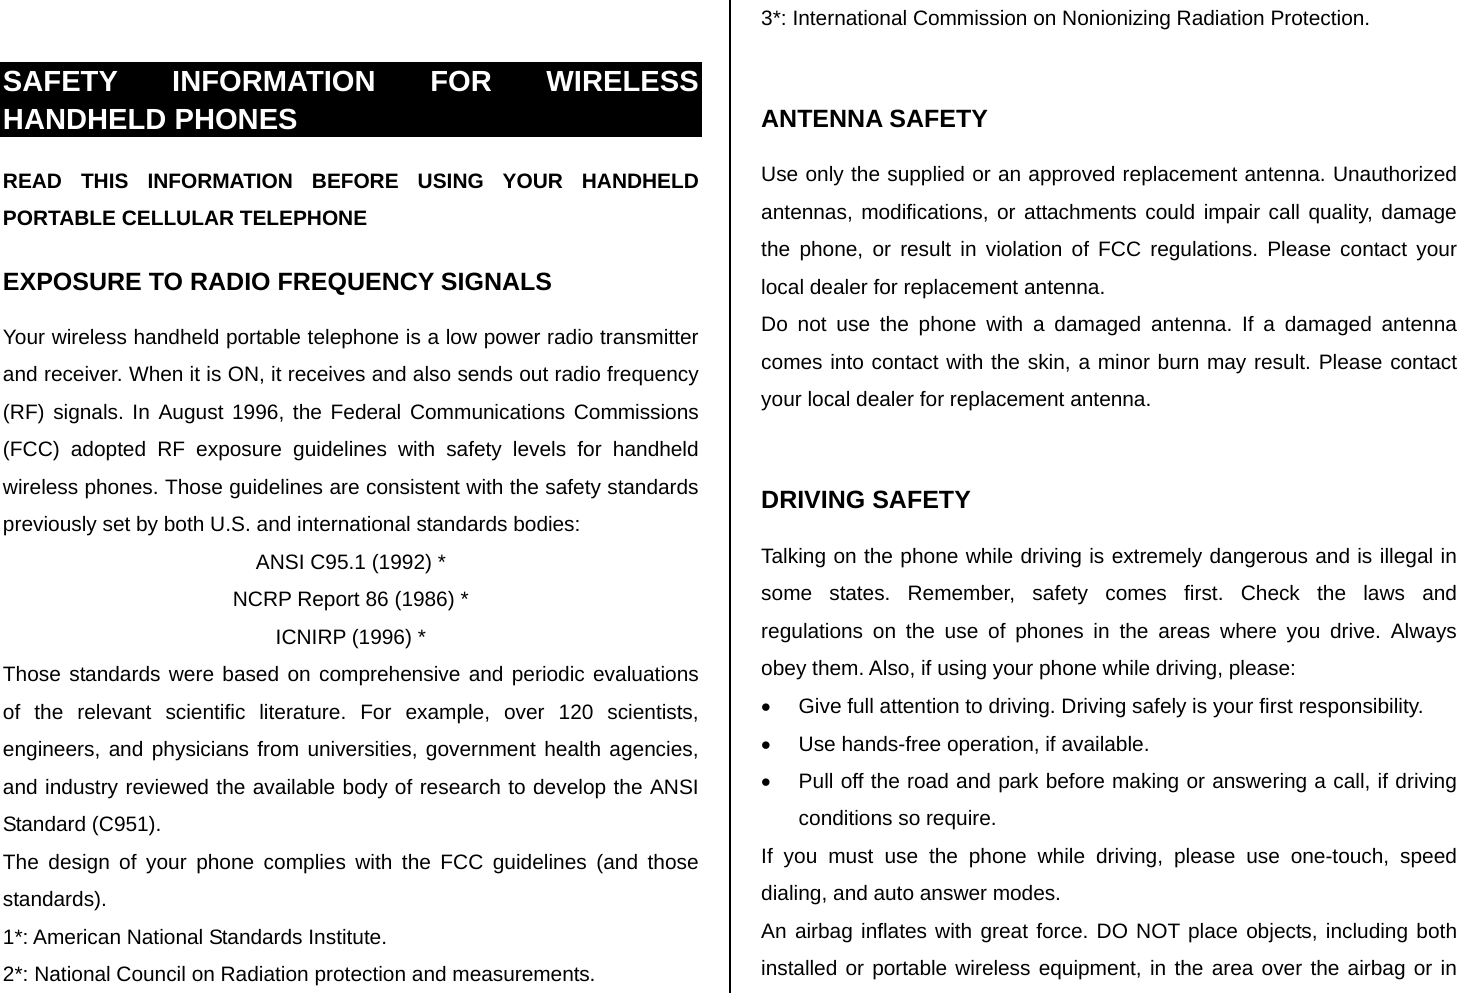  SAFETY INFORMATION FOR WIRELESS HANDHELD PHONES READ THIS INFORMATION BEFORE USING YOUR HANDHELD PORTABLE CELLULAR TELEPHONE EXPOSURE TO RADIO FREQUENCY SIGNALS Your wireless handheld portable telephone is a low power radio transmitter and receiver. When it is ON, it receives and also sends out radio frequency (RF) signals. In August 1996, the Federal Communications Commissions (FCC) adopted RF exposure guidelines with safety levels for handheld wireless phones. Those guidelines are consistent with the safety standards previously set by both U.S. and international standards bodies: ANSI C95.1 (1992) * NCRP Report 86 (1986) * ICNIRP (1996) * Those standards were based on comprehensive and periodic evaluations of the relevant scientific literature. For example, over 120 scientists, engineers, and physicians from universities, government health agencies, and industry reviewed the available body of research to develop the ANSI Standard (C951). The design of your phone complies with the FCC guidelines (and those standards). 1*: American National Standards Institute. 2*: National Council on Radiation protection and measurements. 3*: International Commission on Nonionizing Radiation Protection.  ANTENNA SAFETY Use only the supplied or an approved replacement antenna. Unauthorized antennas, modifications, or attachments could impair call quality, damage the phone, or result in violation of FCC regulations. Please contact your local dealer for replacement antenna. Do not use the phone with a damaged antenna. If a damaged antenna comes into contact with the skin, a minor burn may result. Please contact your local dealer for replacement antenna.  DRIVING SAFETY Talking on the phone while driving is extremely dangerous and is illegal in some states. Remember, safety comes first. Check the laws and regulations on the use of phones in the areas where you drive. Always obey them. Also, if using your phone while driving, please: •  Give full attention to driving. Driving safely is your first responsibility. •  Use hands-free operation, if available. •  Pull off the road and park before making or answering a call, if driving conditions so require. If you must use the phone while driving, please use one-touch, speed dialing, and auto answer modes. An airbag inflates with great force. DO NOT place objects, including both installed or portable wireless equipment, in the area over the airbag or in 